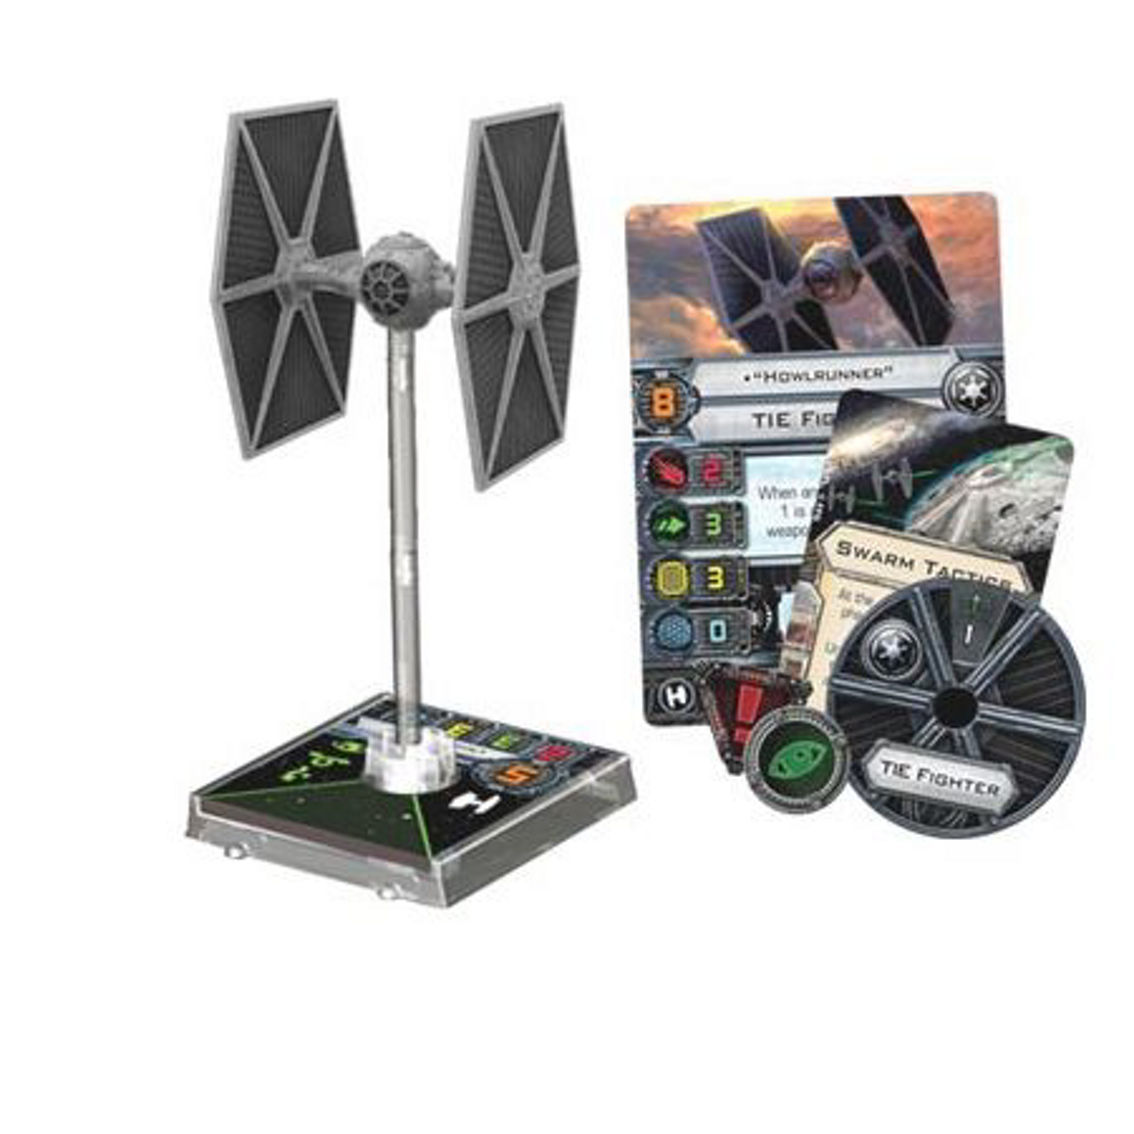 Fantasy Flight Games Star Wars X-Wing Miniatures Game - TIE Fighter Expansion Pack - Image 3 of 3